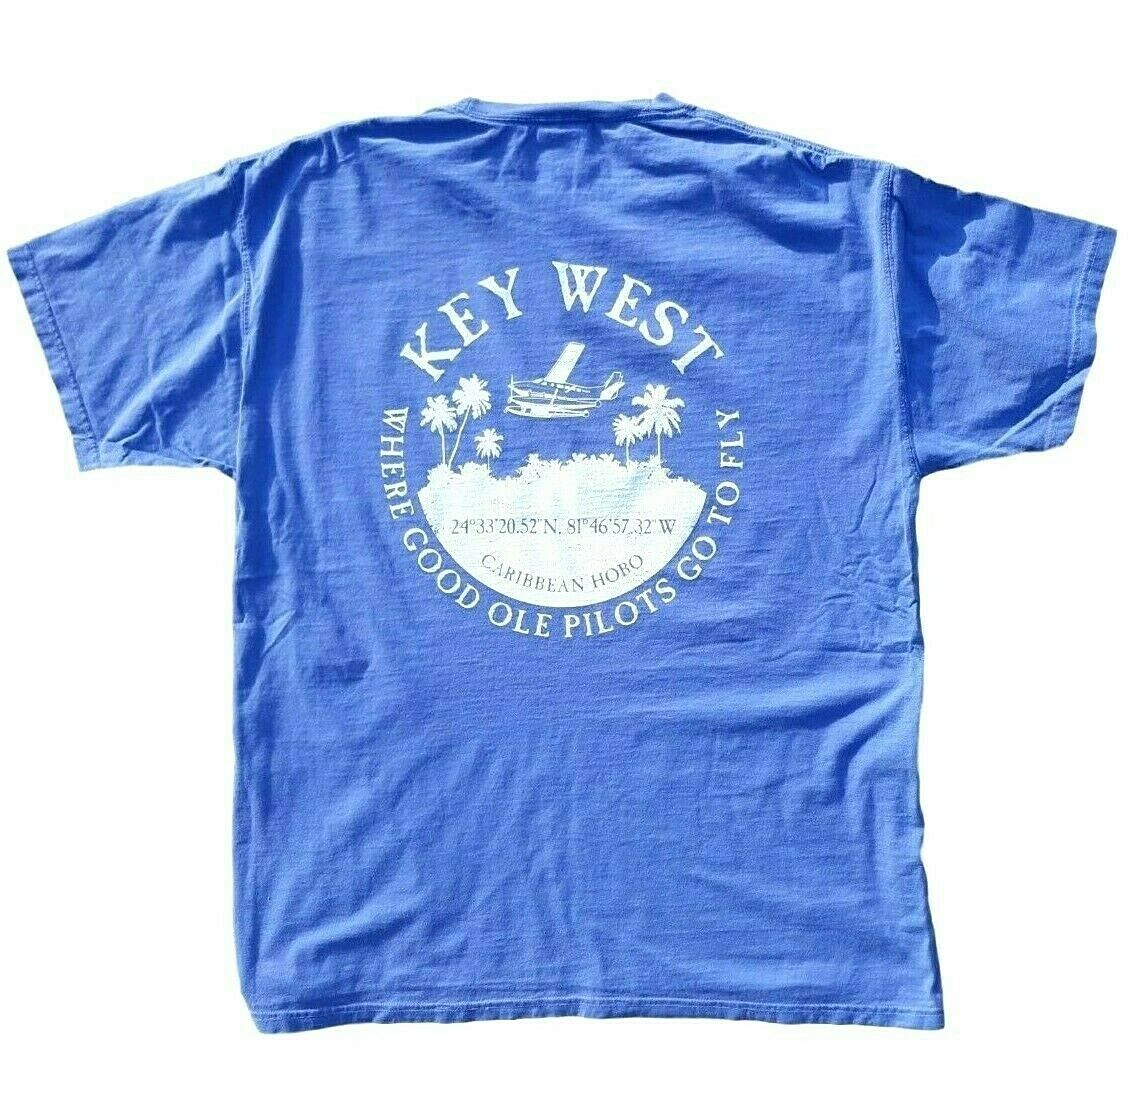 Caribbean Hobo's Key West....Where good ole pilots go to fly. t-shirt